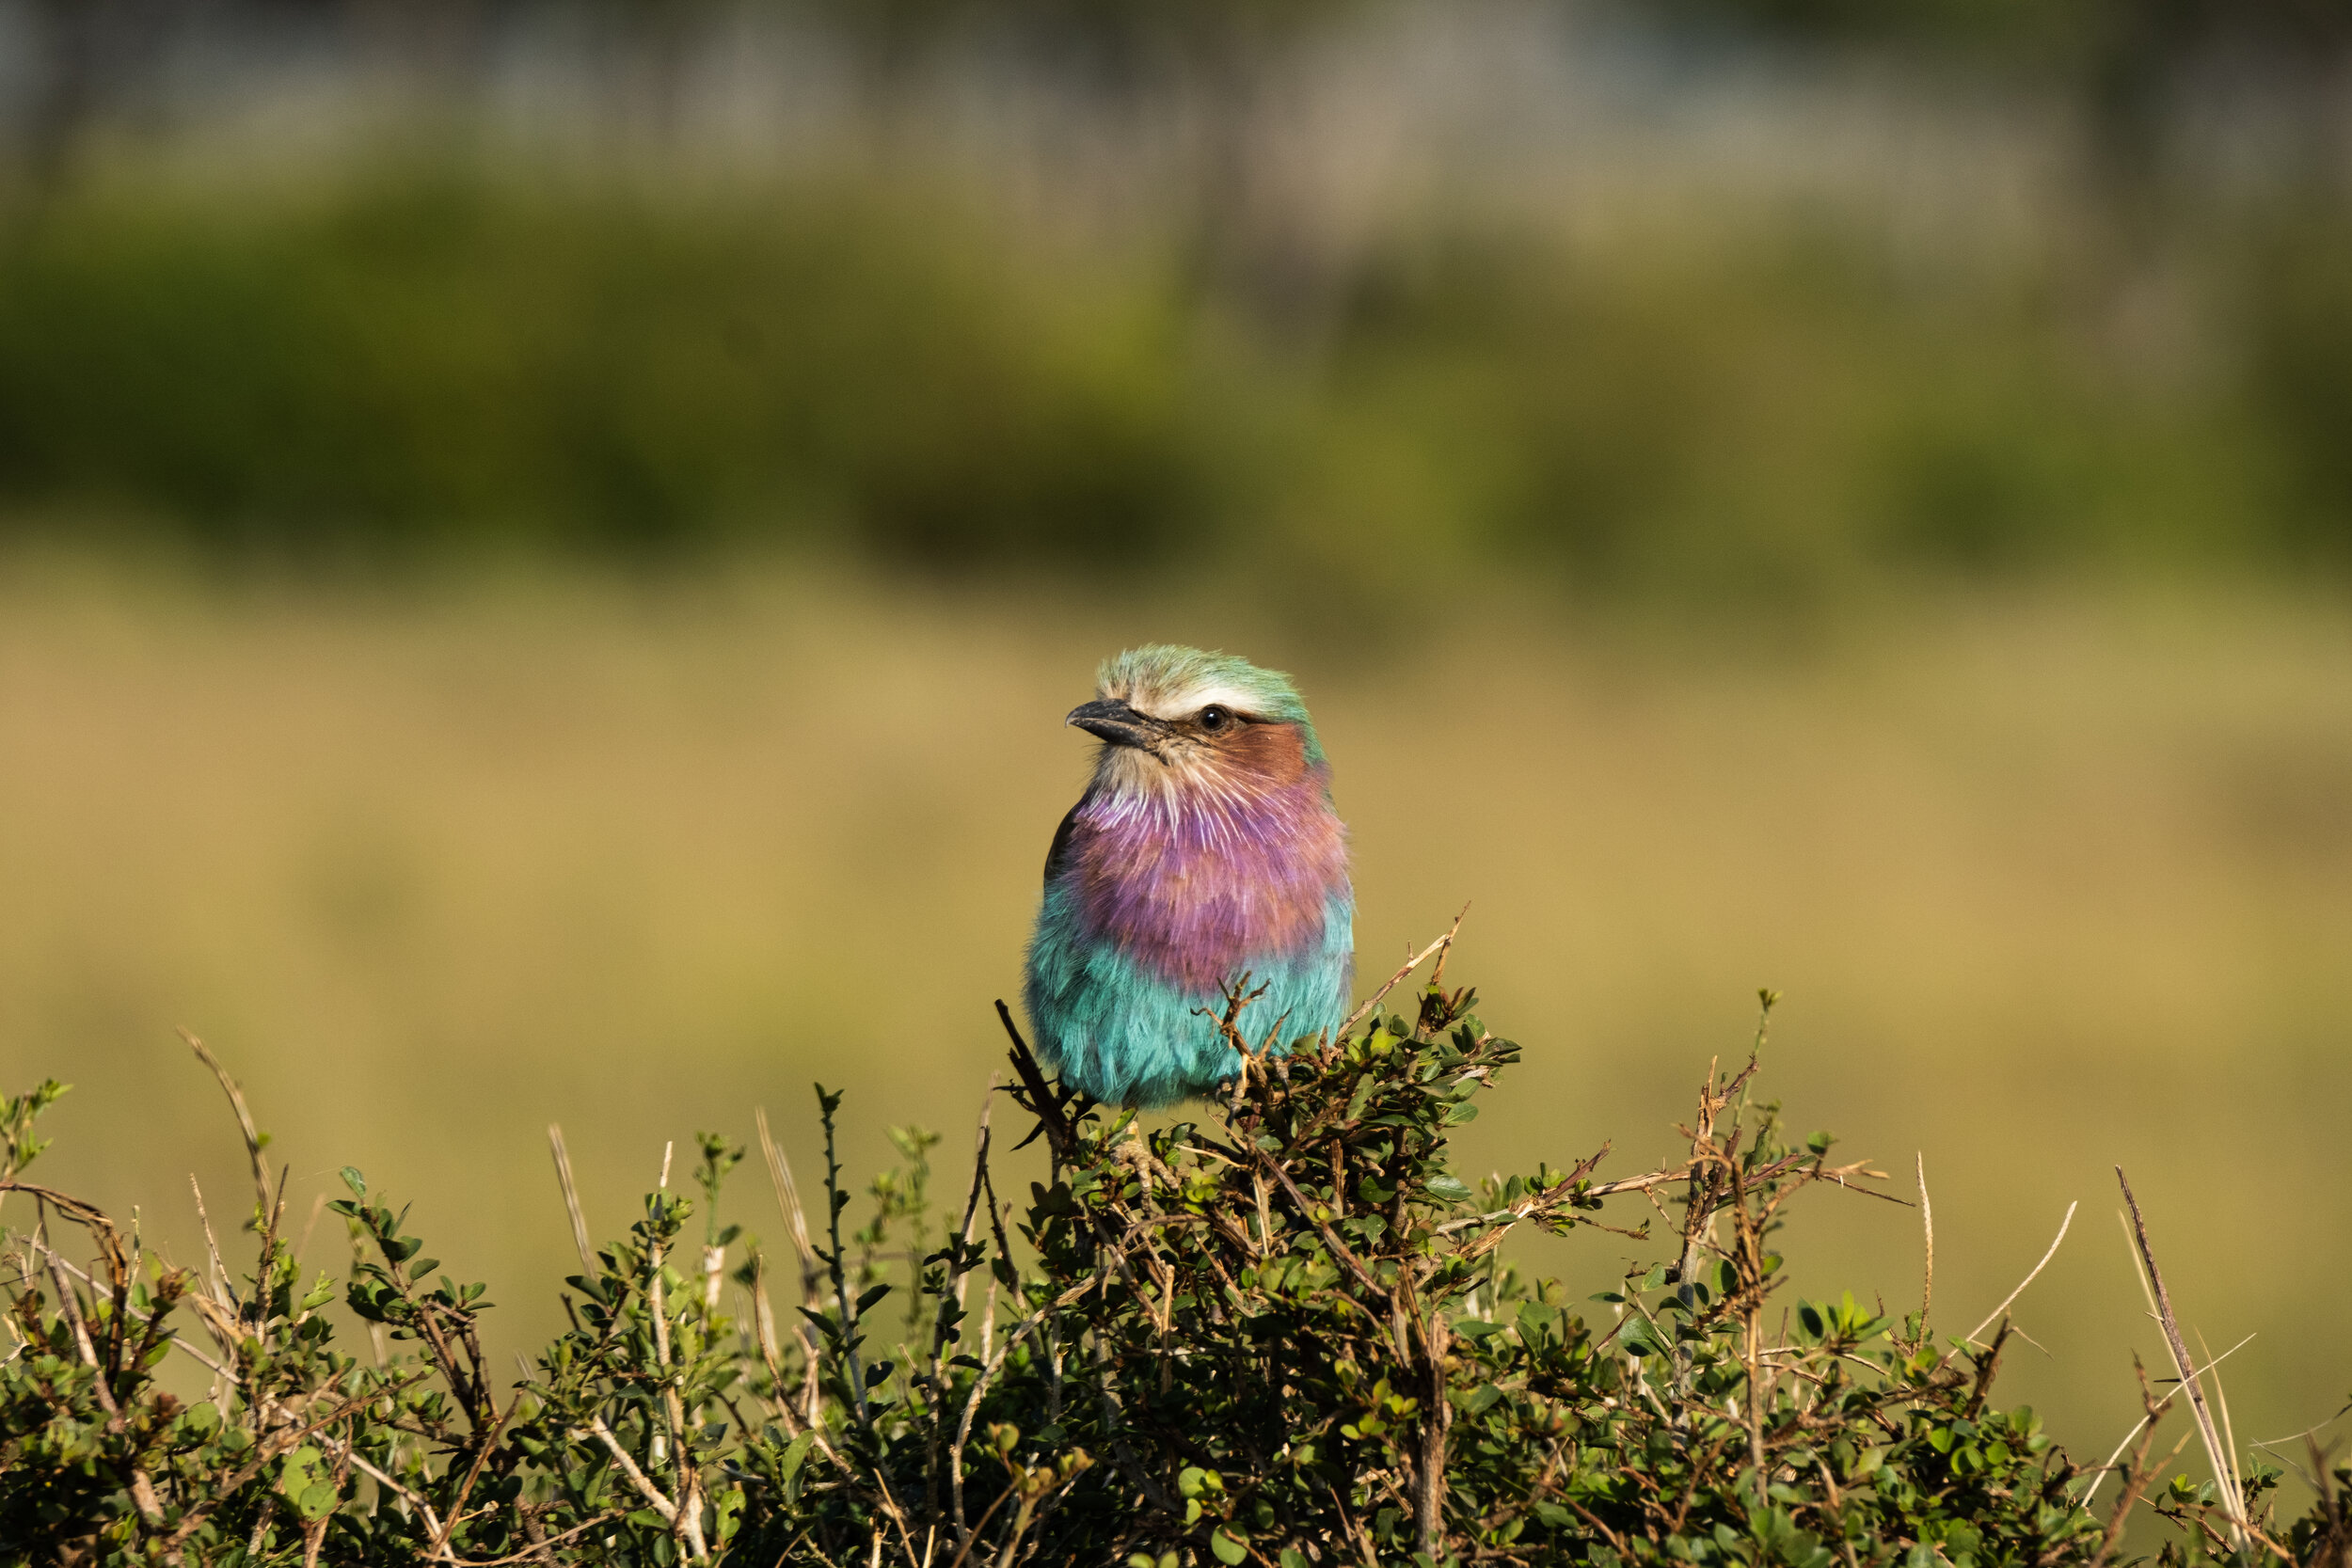  My favorite bird, the Lilac breasted roller, photographed by Robert Kip 